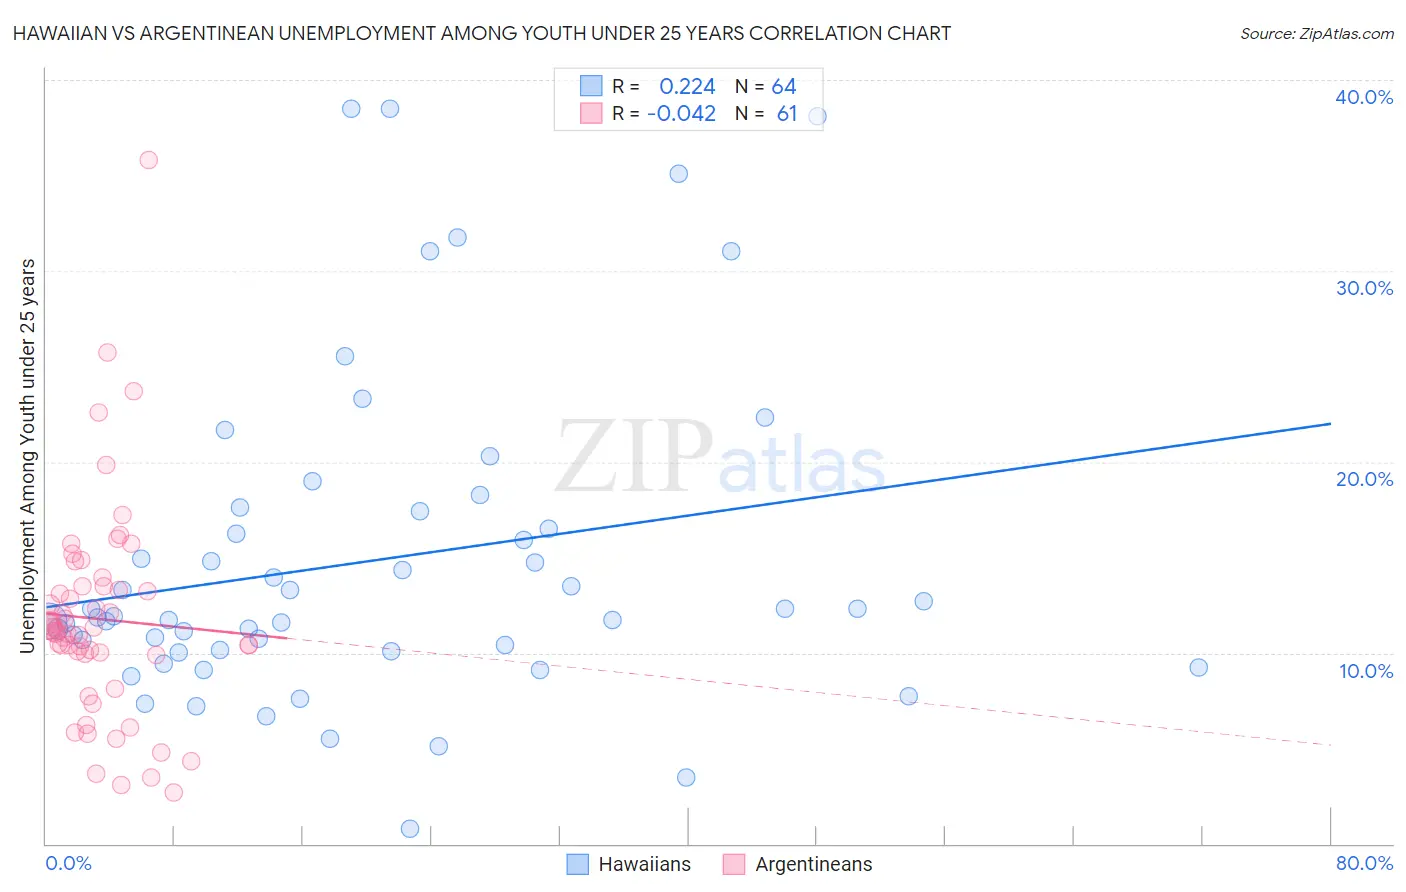 Hawaiian vs Argentinean Unemployment Among Youth under 25 years